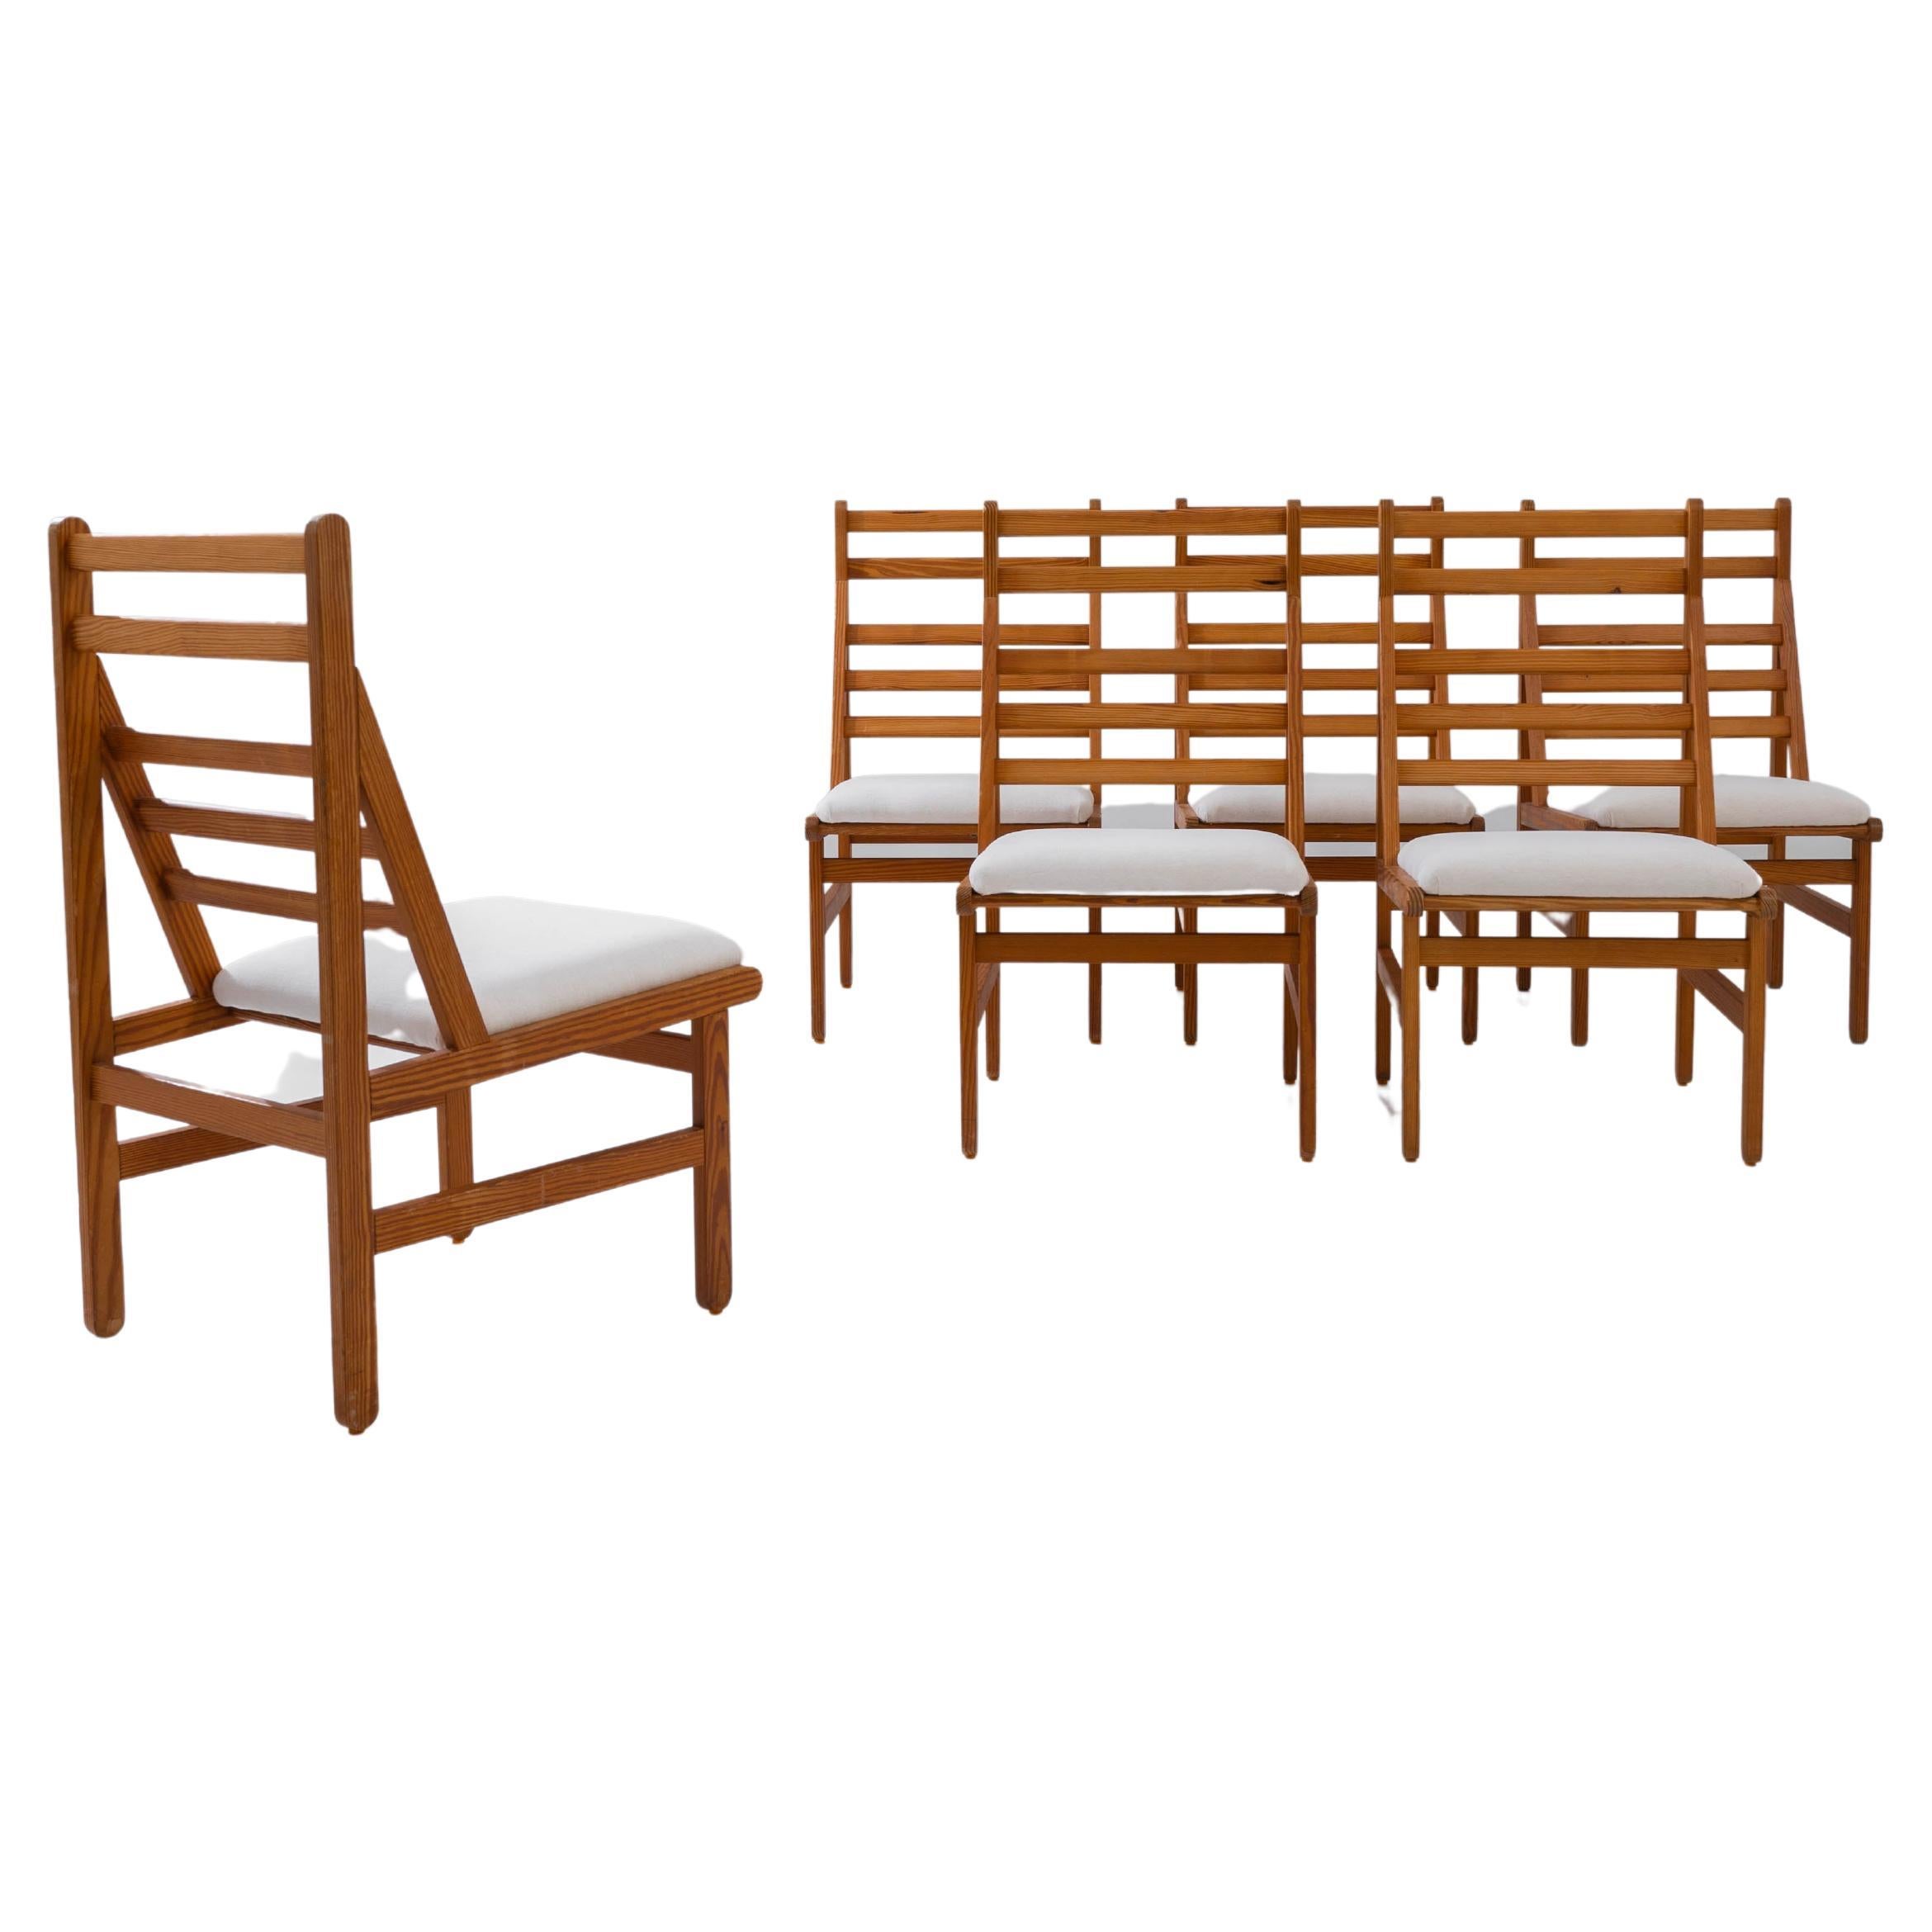 20th Century Danish Wooden Dining Chairs With Upholstered Seats By Arne Norell For Sale